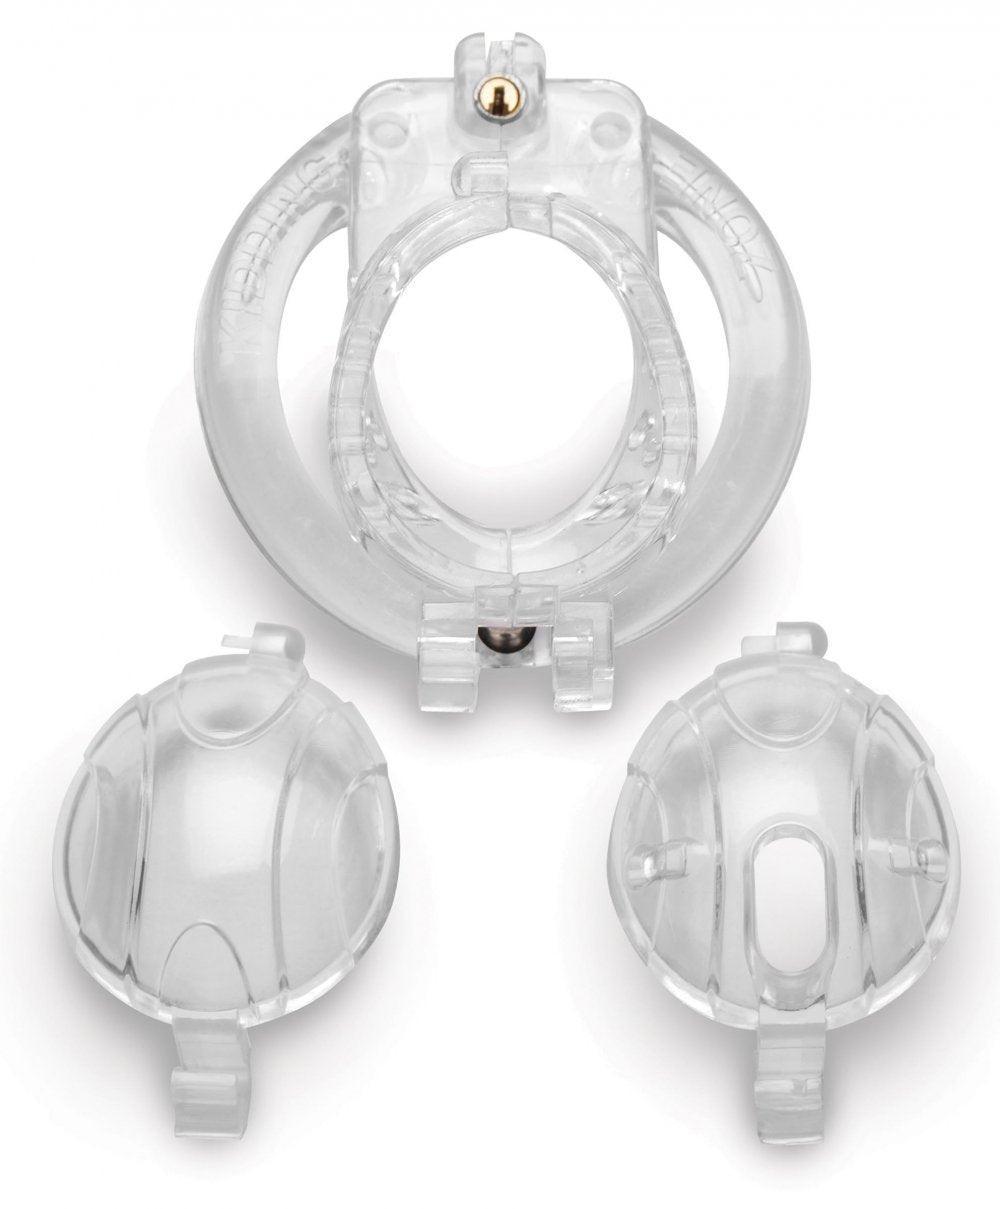 Lockdown Customizable Chastity Cage - Clear - My Sex Toy Hub